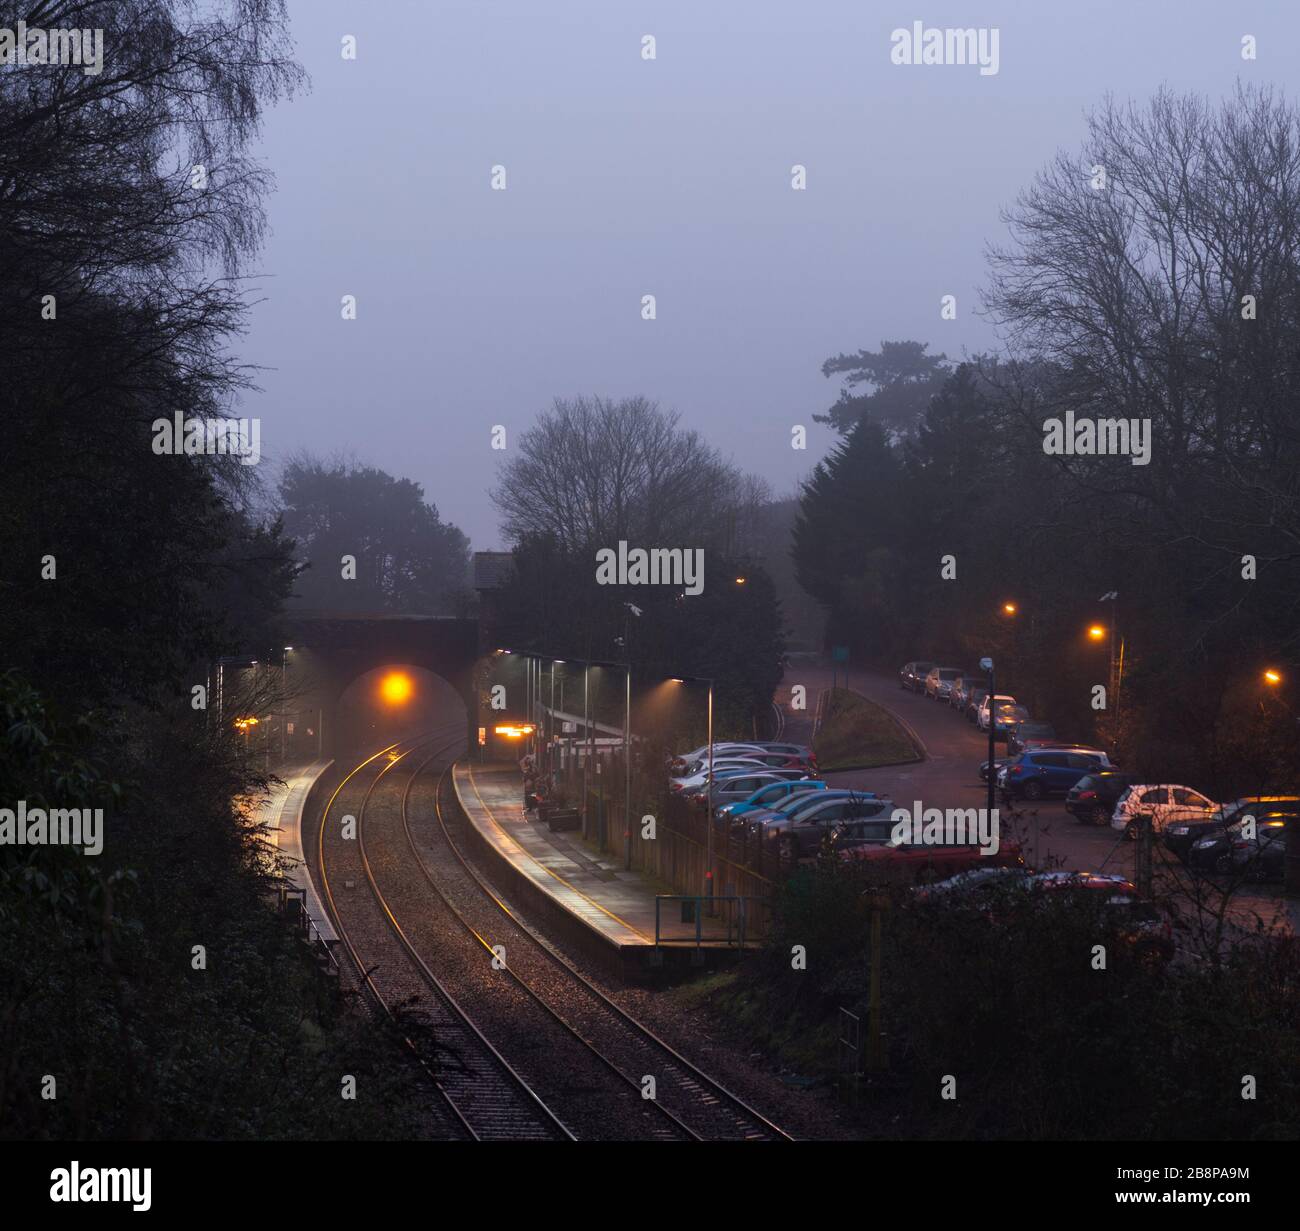 Llanishen railway station in the south Wales valleys at dusk on a damp, misty day Stock Photo